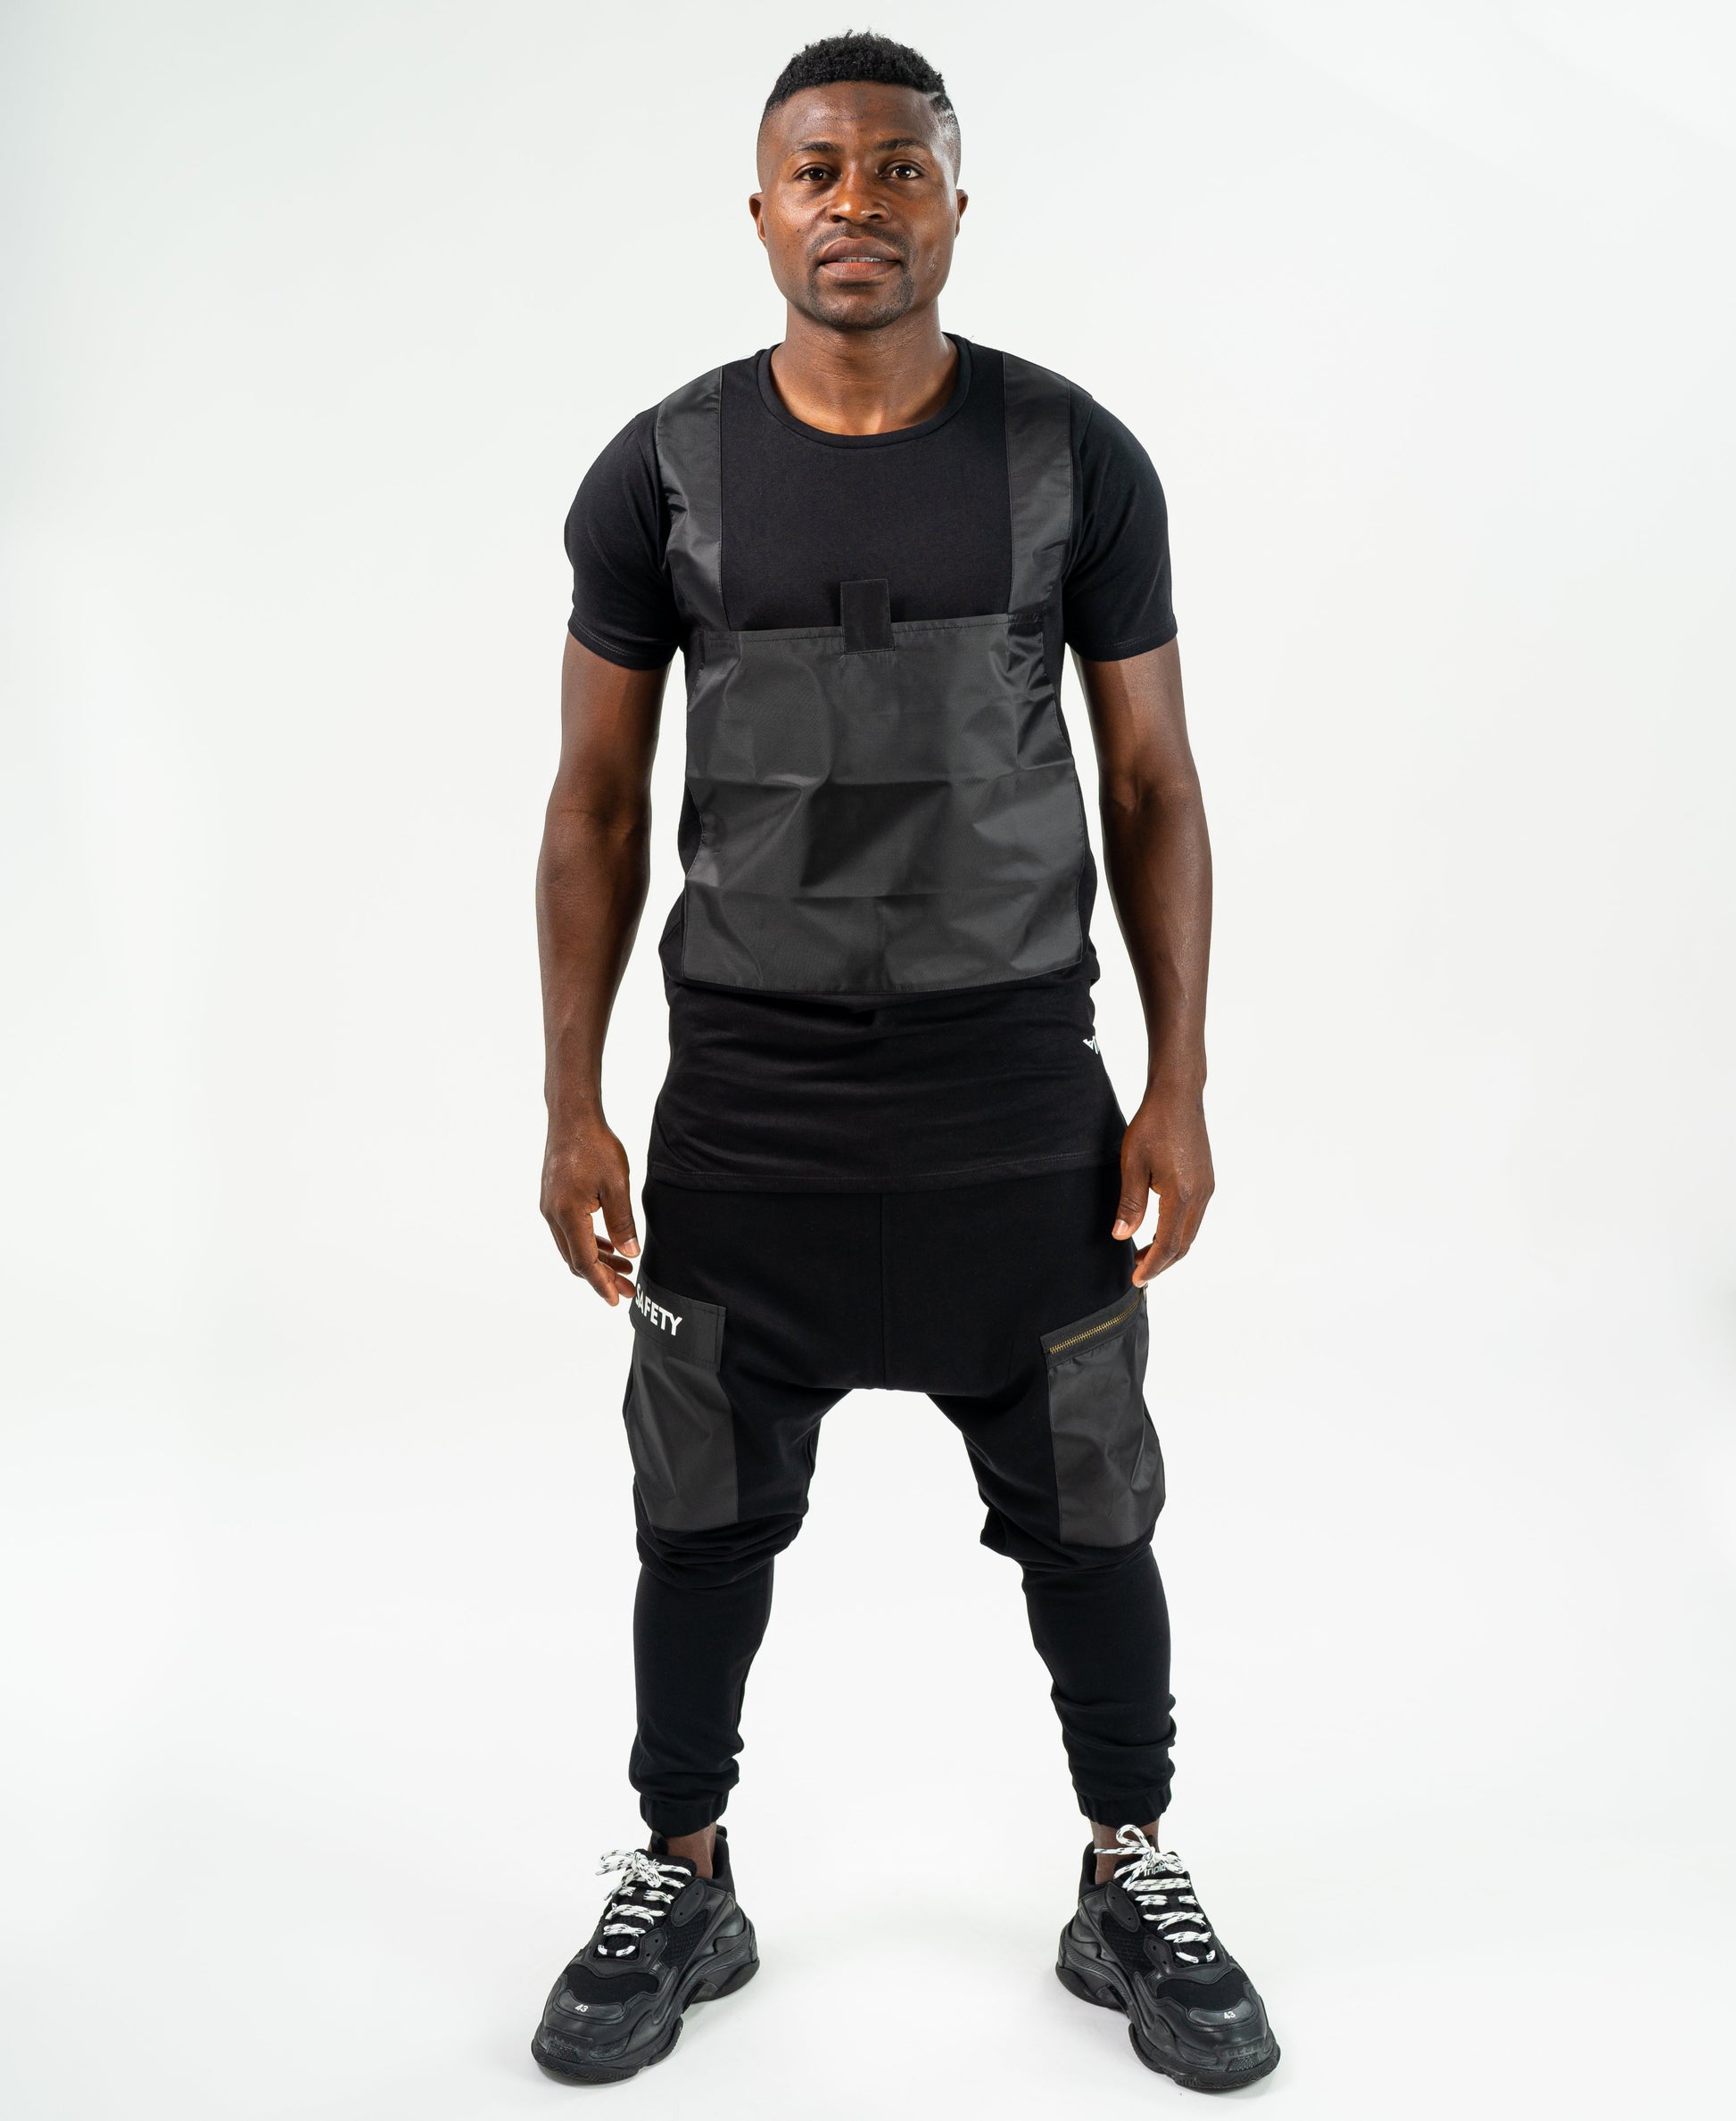 Black t-shirt with bulletproof design - Fatai Style